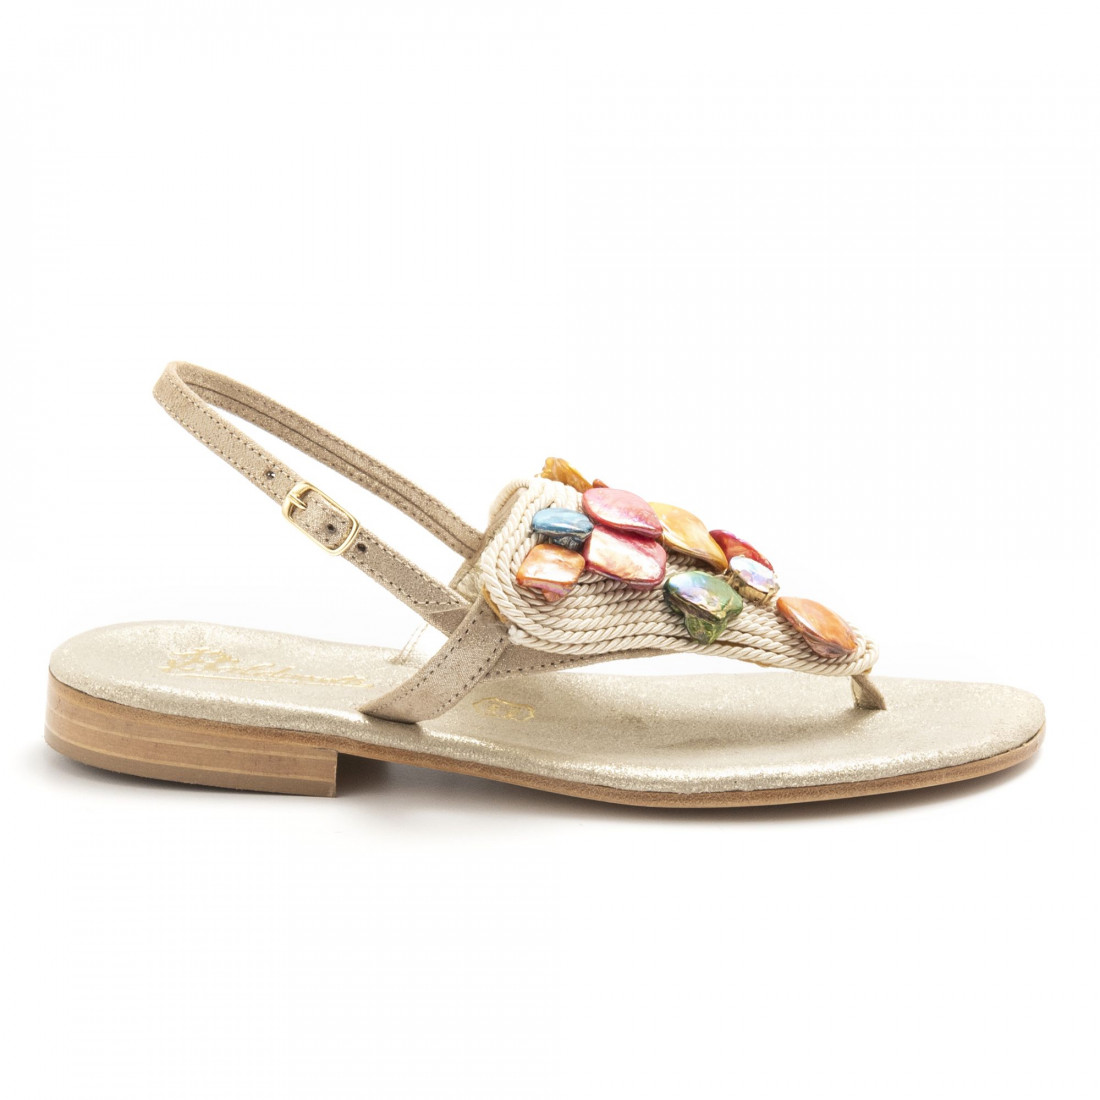 Gold Balduccelli flip flop sandals with rope and colored stones